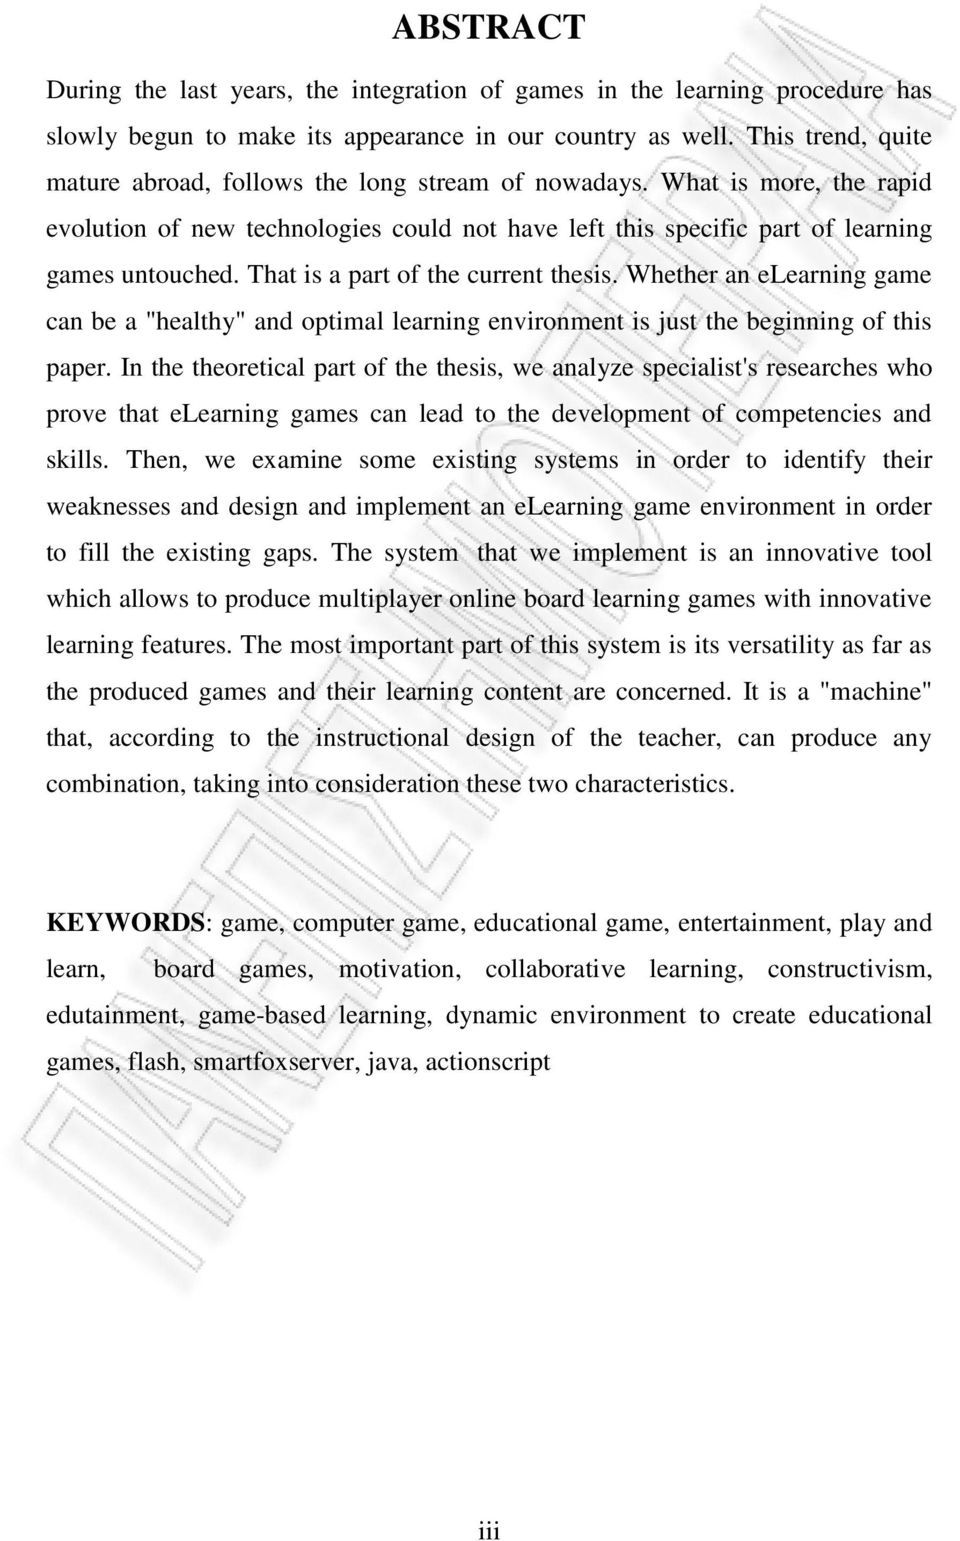 That is a part of the current thesis. Whether an elearning game can be a "healthy" and optimal learning environment is just the beginning of this paper.